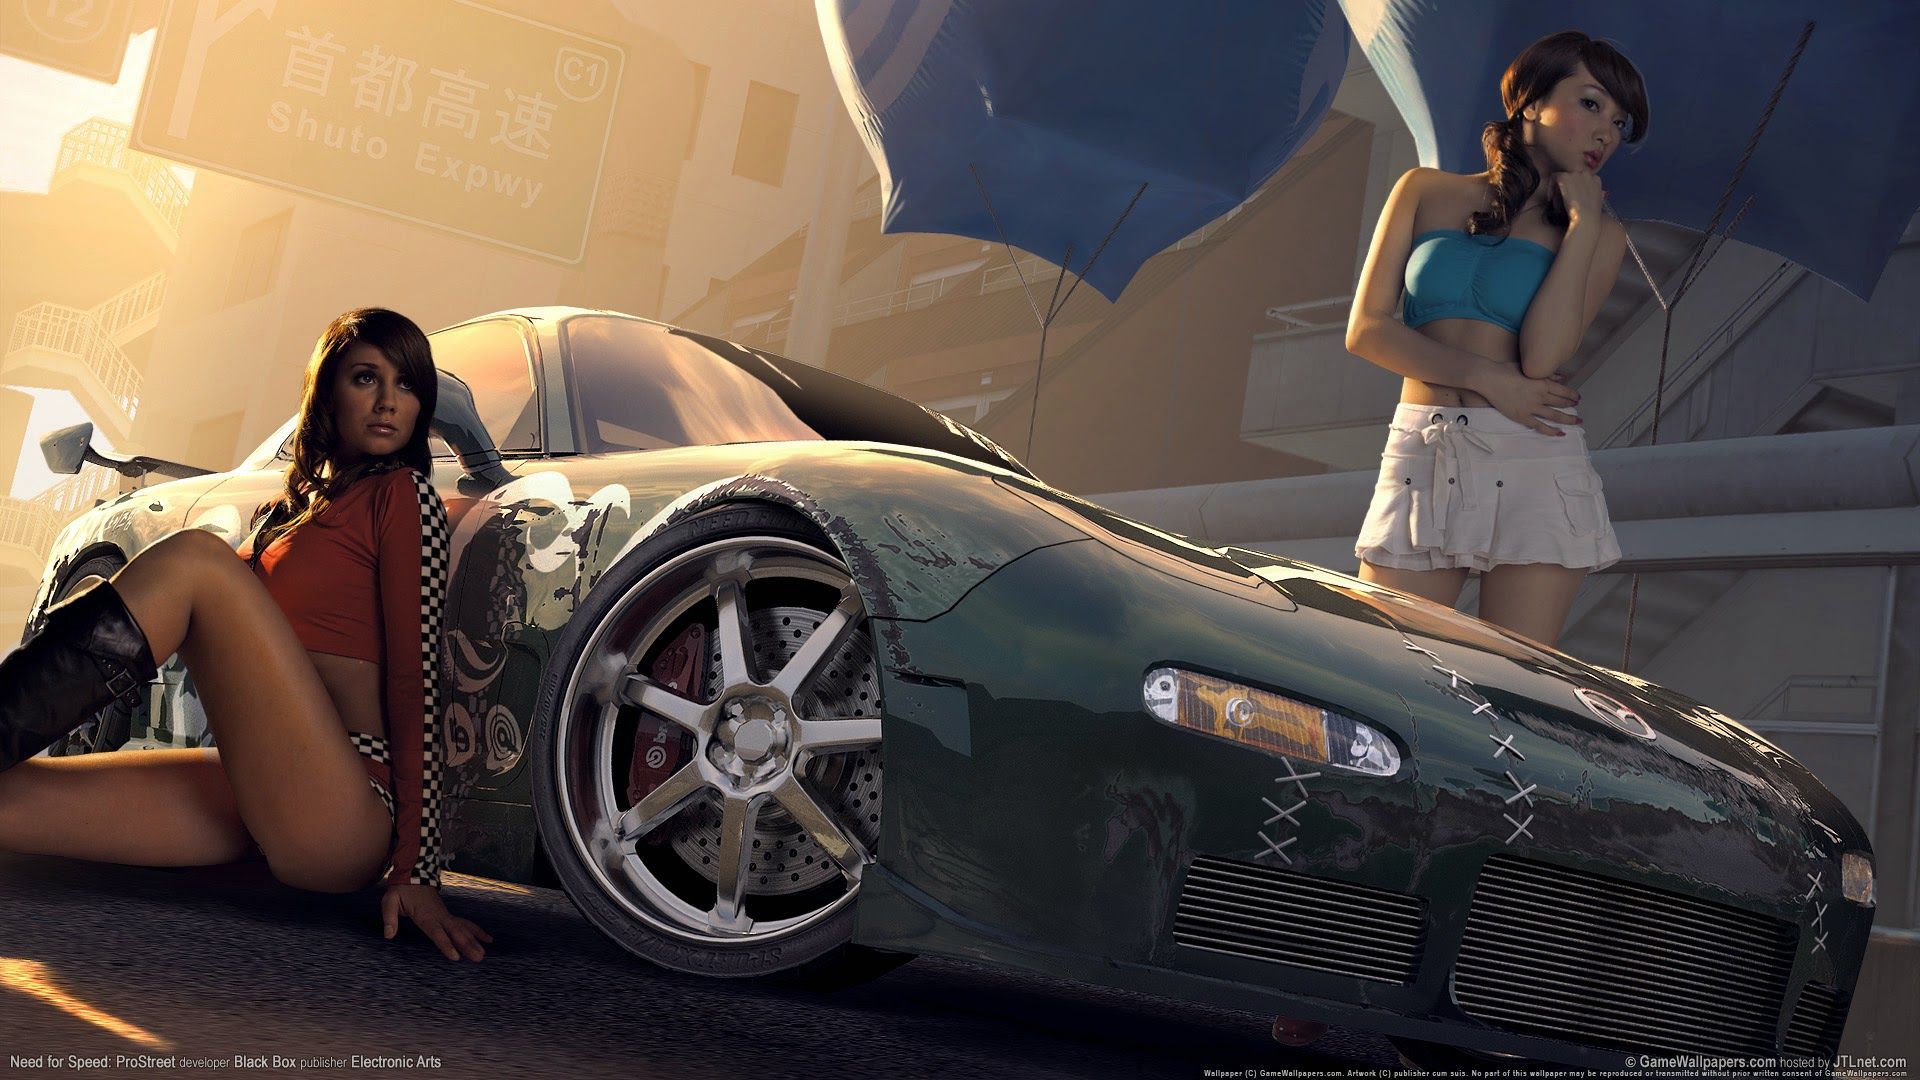 Am I the only one who loved the NFS girls?